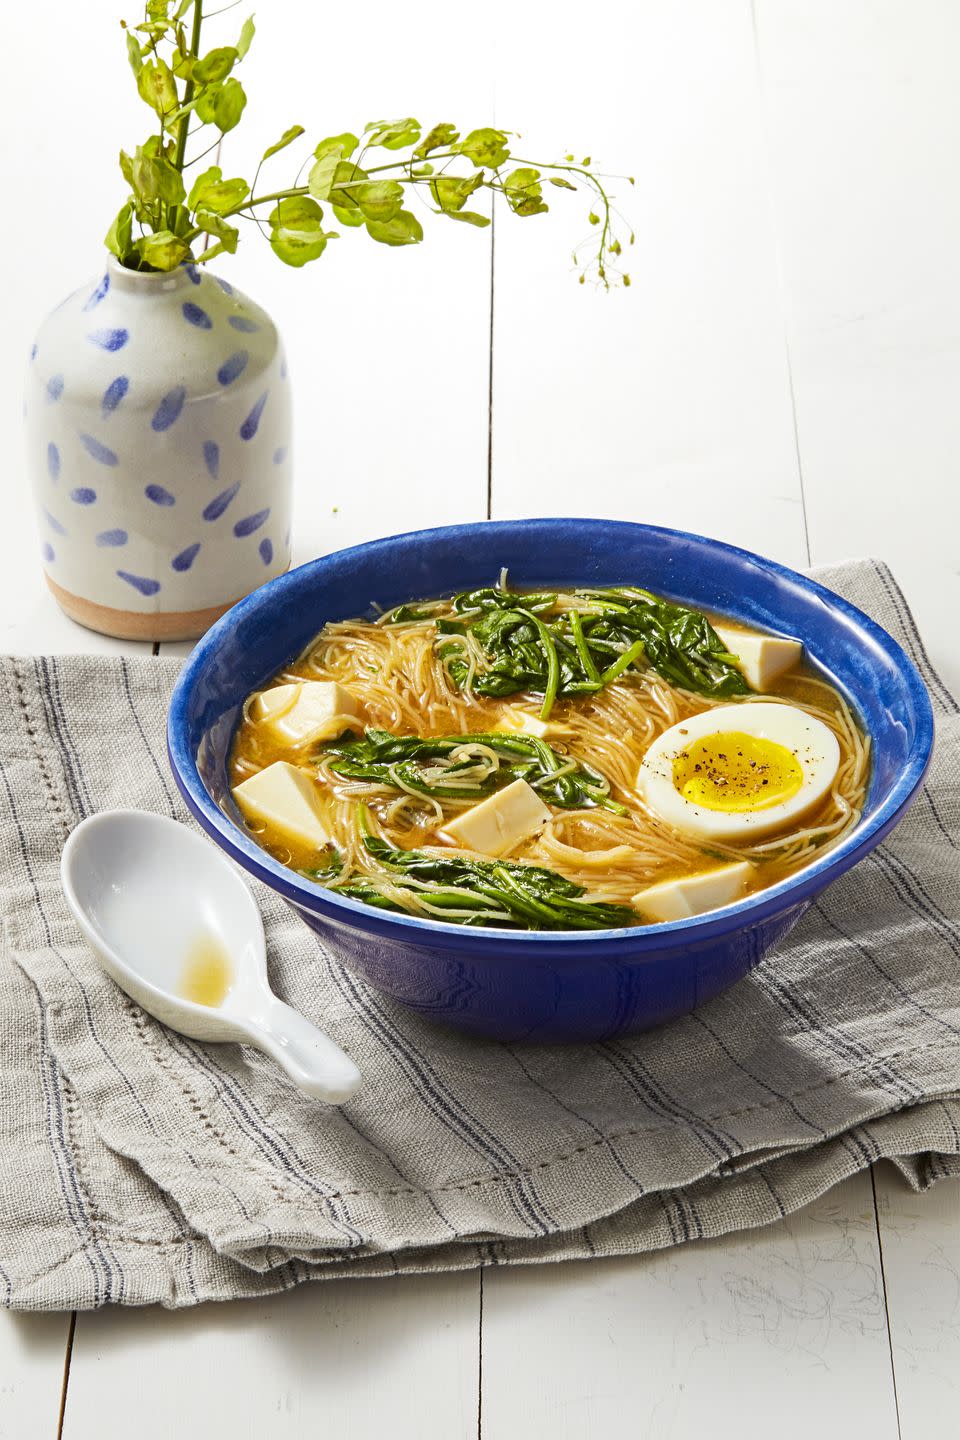 <p>In many Asian countries, people eat long noodles on New Year's Day to lengthen their life. One catch: You can't break the noodle from your plate to your mouth.</p><p><strong>Try these recipes:</strong></p><p><em><em><em><a href="https://www.goodhousekeeping.com/food-recipes/easy/a25336953/asian-steak-noodle-bowl-recipe/" rel="nofollow noopener" target="_blank" data-ylk="slk:Asian Steak Noodle Bowl »" class="link ">Asian Steak Noodle Bowl »</a></em></em></em></p><p><em><em><a href="https://www.goodhousekeeping.com/food-recipes/easy/a47690/thai-style-shrimp-and-coconut-noodles-recipe/" rel="nofollow noopener" target="_blank" data-ylk="slk:Thai-Style Shrimp and Coconut Noodles »" class="link ">Thai-Style Shrimp and Coconut Noodles »</a></em></em></p><p><em><a href="https://www.goodhousekeeping.com/food-recipes/easy/a48188/tofu-pad-thai-recipe/" rel="nofollow noopener" target="_blank" data-ylk="slk:Tofu Pad Thai »" class="link ">Tofu Pad Thai »</a></em></p><p><em><a href="https://www.goodhousekeeping.com/food-recipes/healthy/a42200/peanutty-edamame-and-noodle-salad-recipe/" rel="nofollow noopener" target="_blank" data-ylk="slk:Peanutty Edamame and Noodle Salad »" class="link ">Peanutty Edamame and Noodle Salad »</a></em></p><p><em><a href="https://www.goodhousekeeping.com/food-recipes/easy/a42182/red-curry-shrimp-and-noodles-recipe/" rel="nofollow noopener" target="_blank" data-ylk="slk:Red Curry Shrimp and Noodles »" class="link ">Red Curry Shrimp and Noodles »</a><br></em></p>